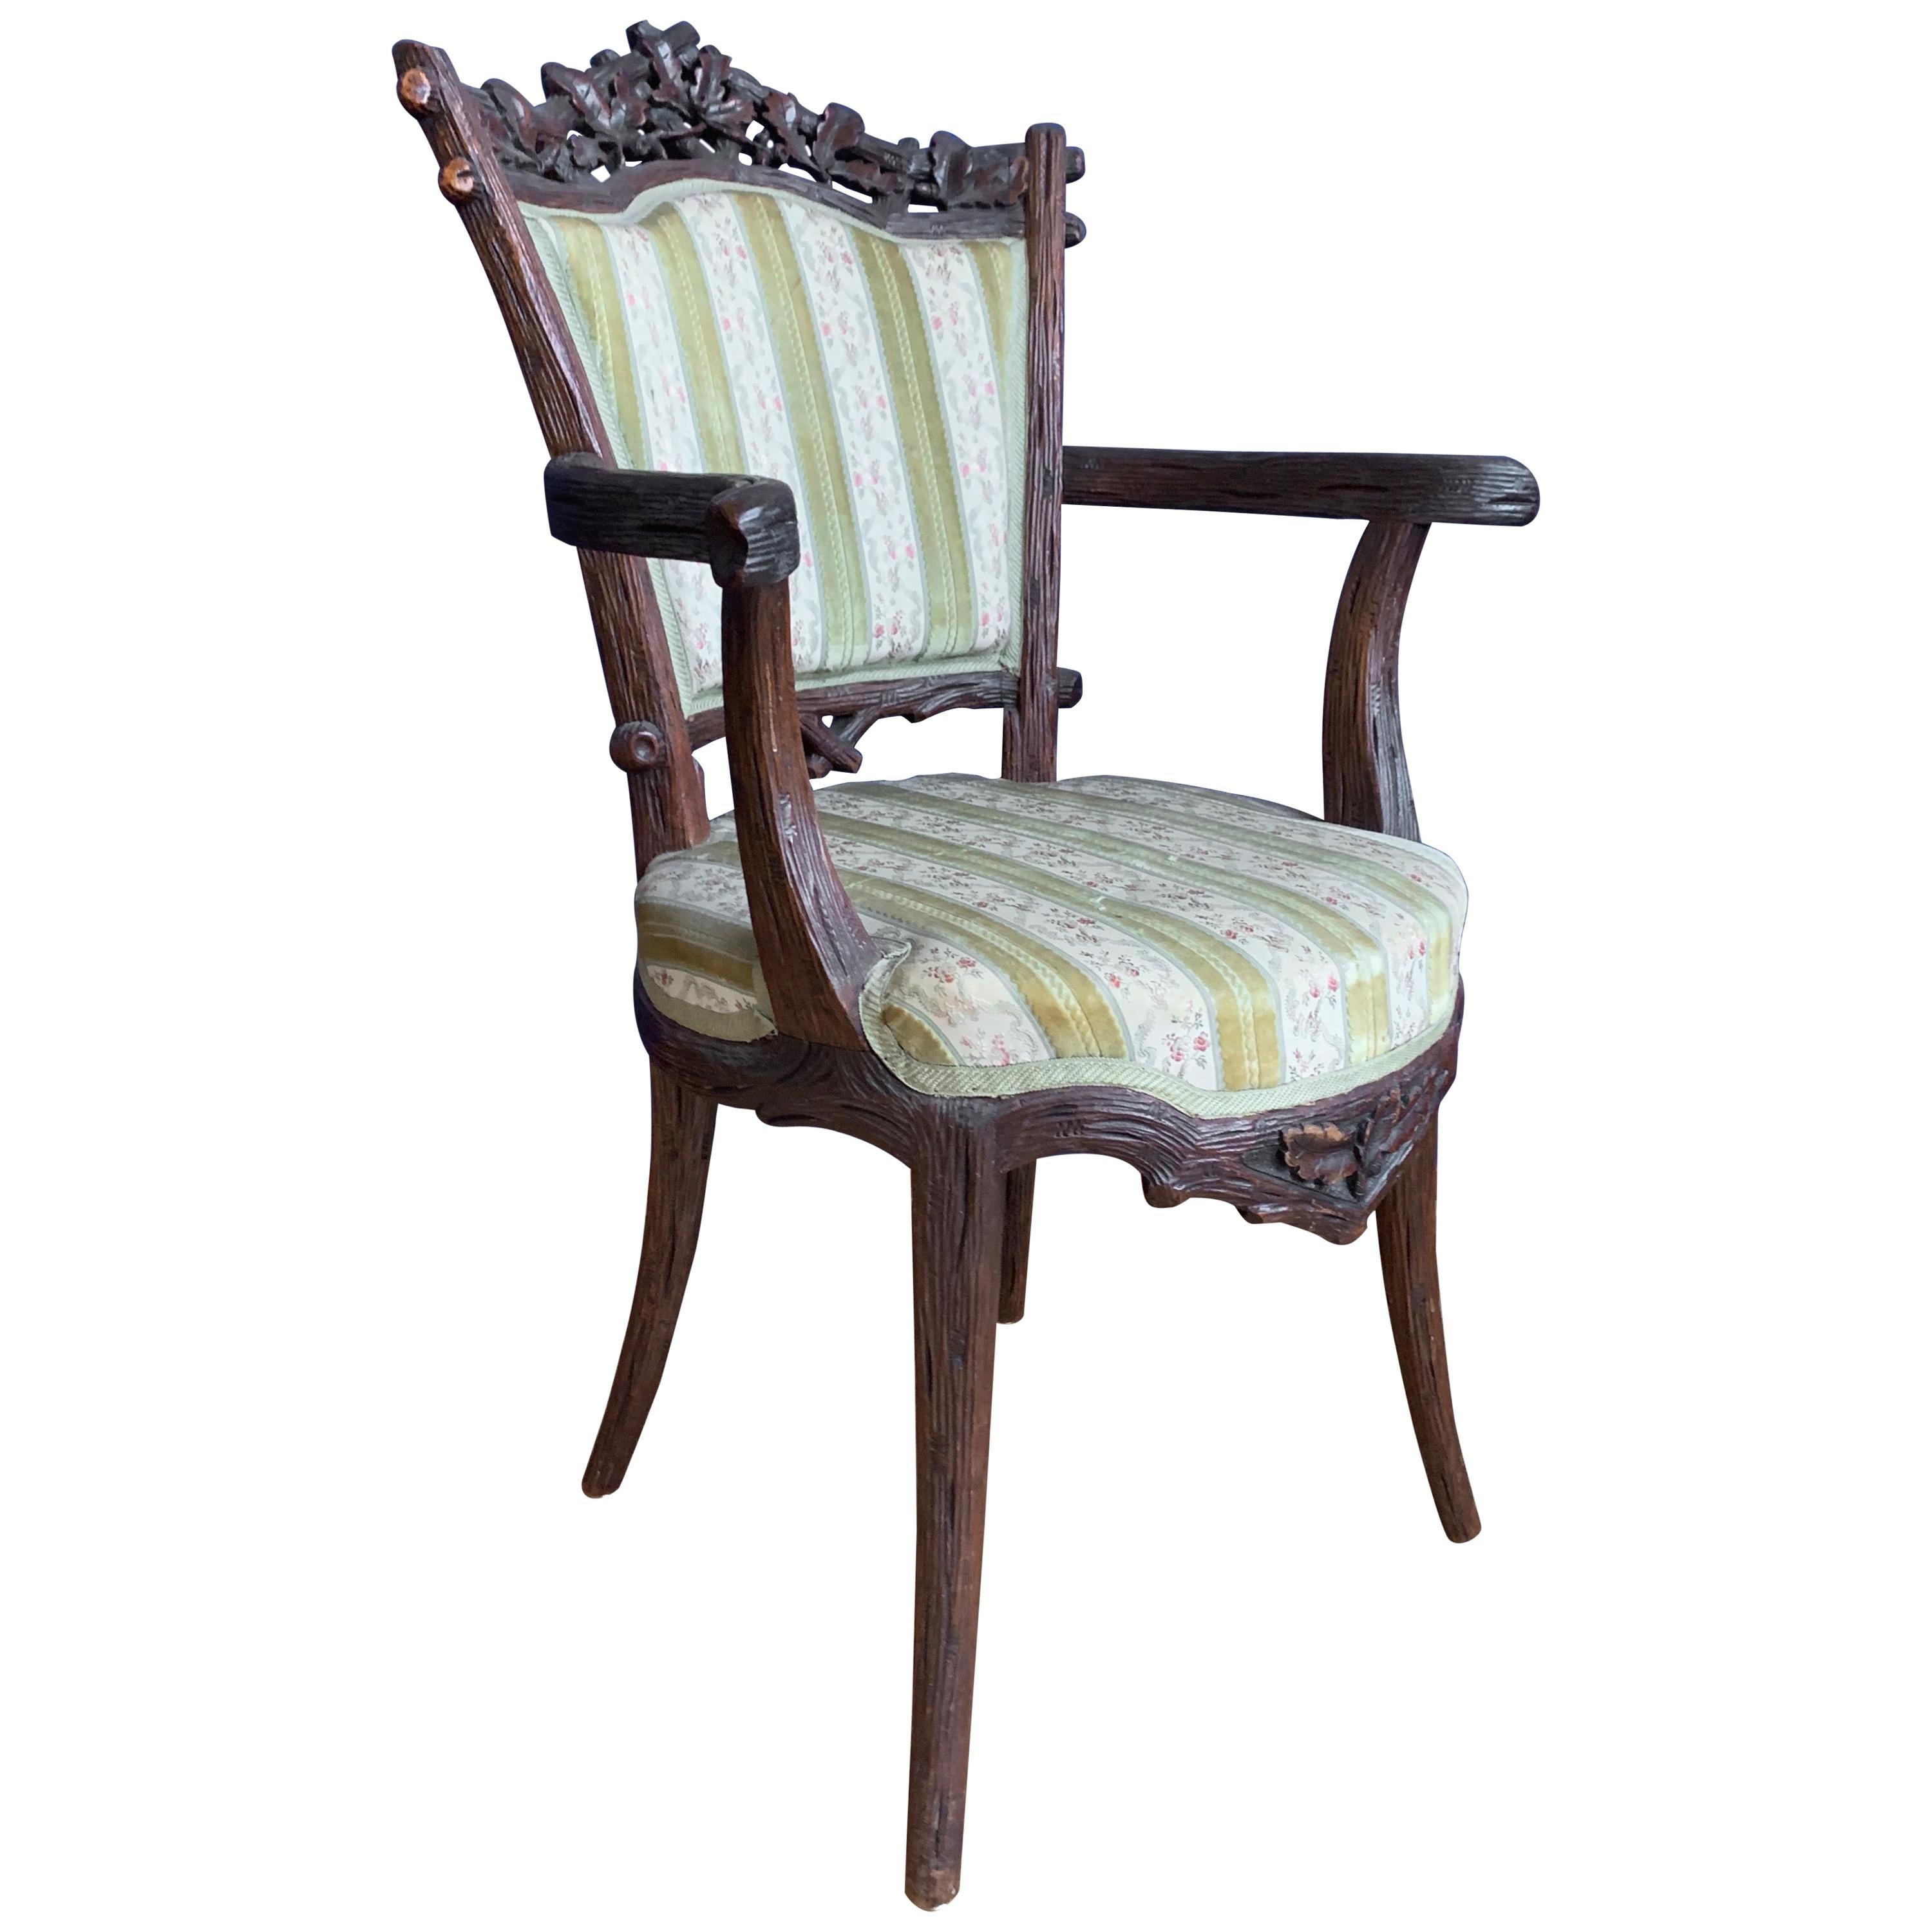 Rare 19th Century Black Forest Walnut Armchair by Horrix with Classy Upholstery